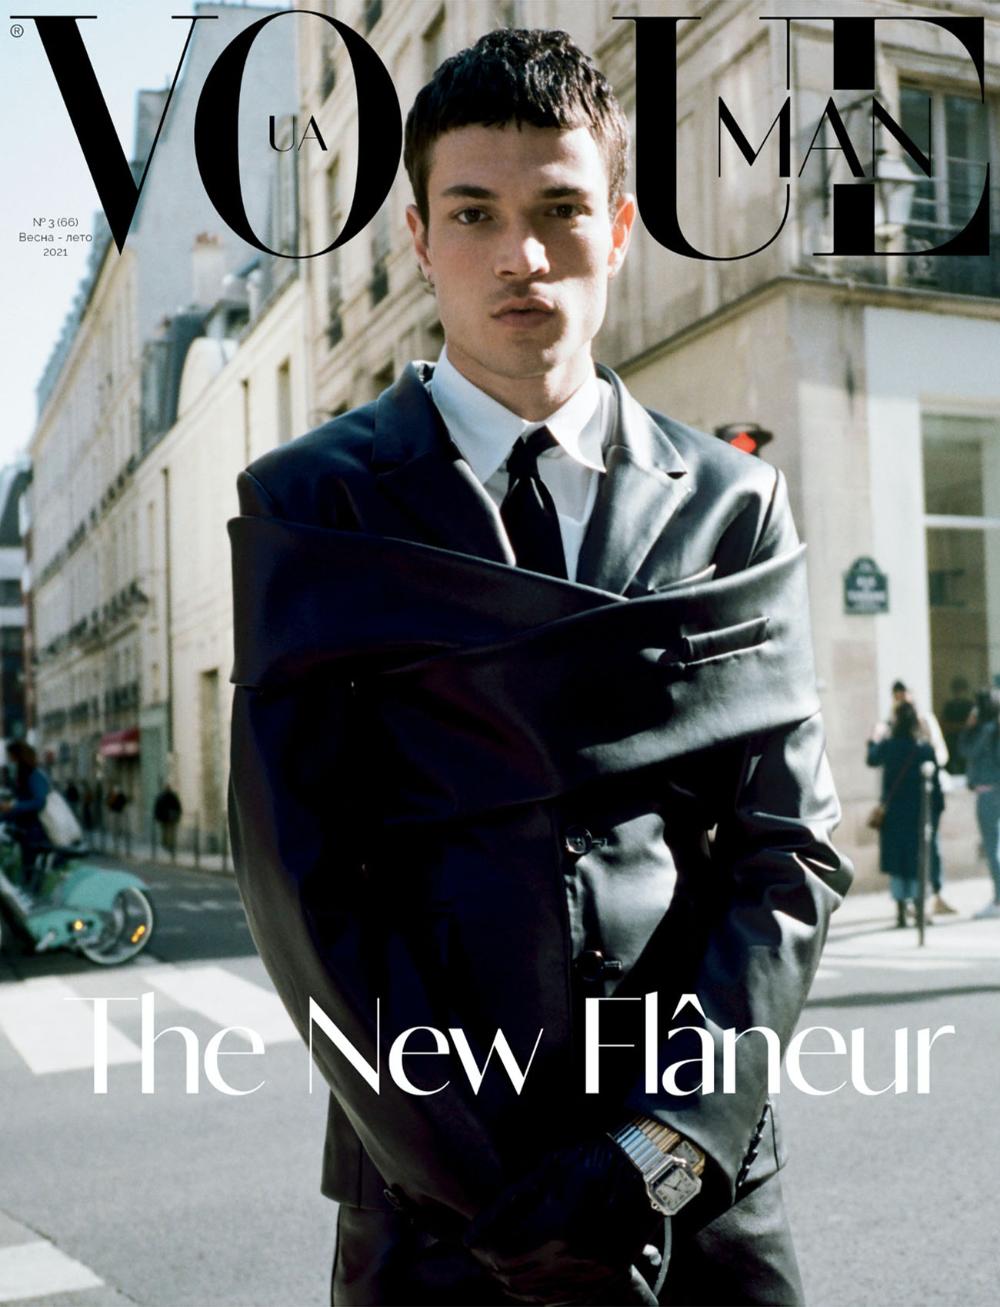 Luka Isaac by Pierre-Ange Carlotti for Vogue Ukraine Man Spring-Summer 2021. Clothing & Accessories: Jacket, trousers by GMBH / Prada classic white shirt / Tie by Prada / Watches by Cartier